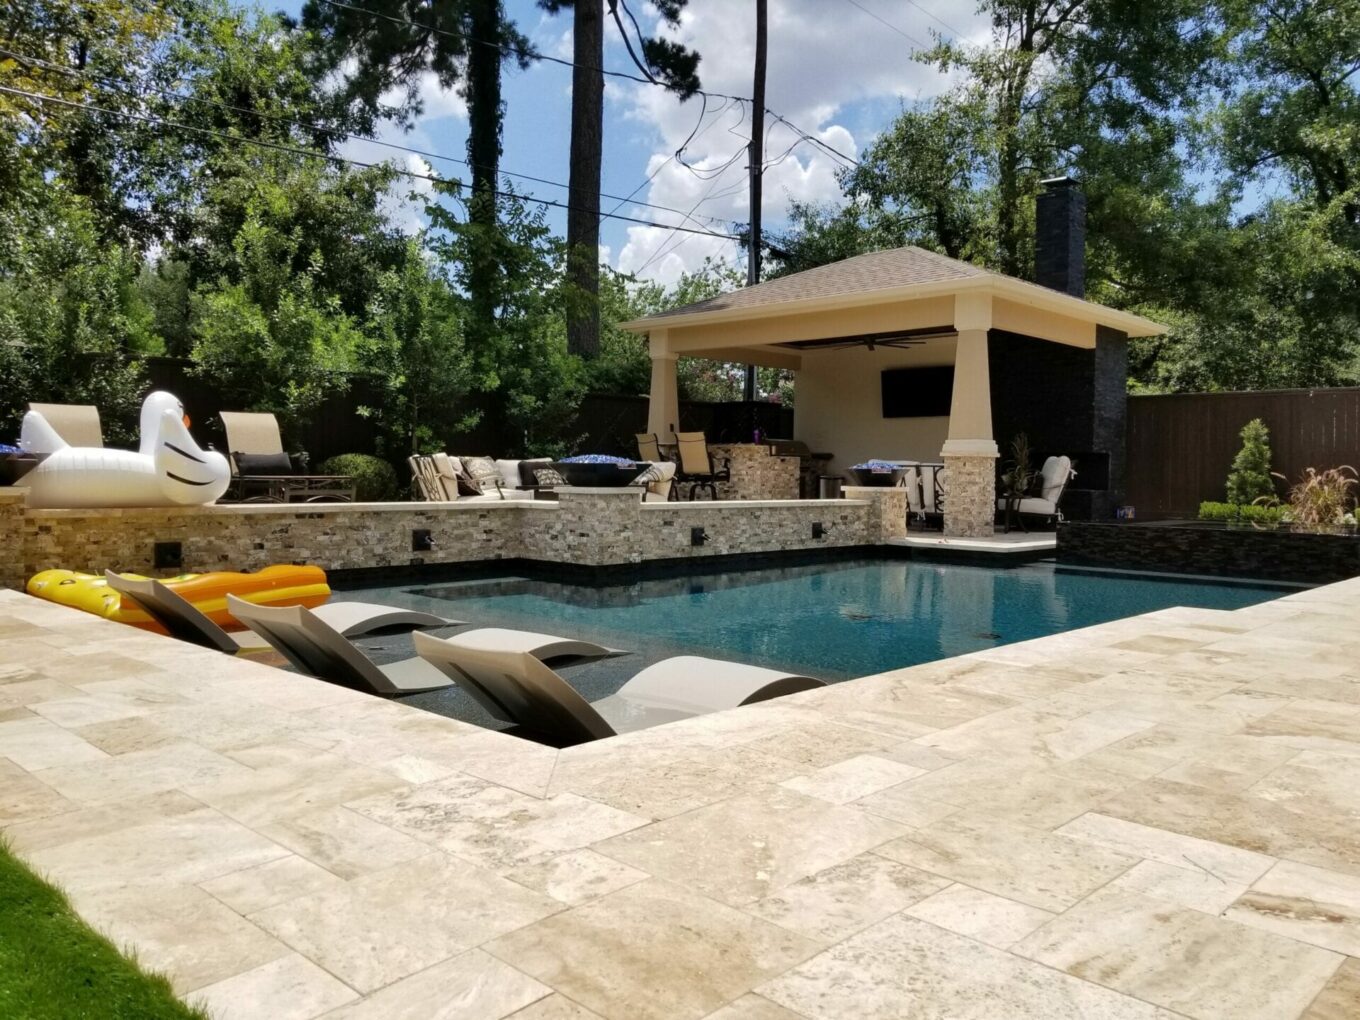 A pool with an outdoor grill and seating area.